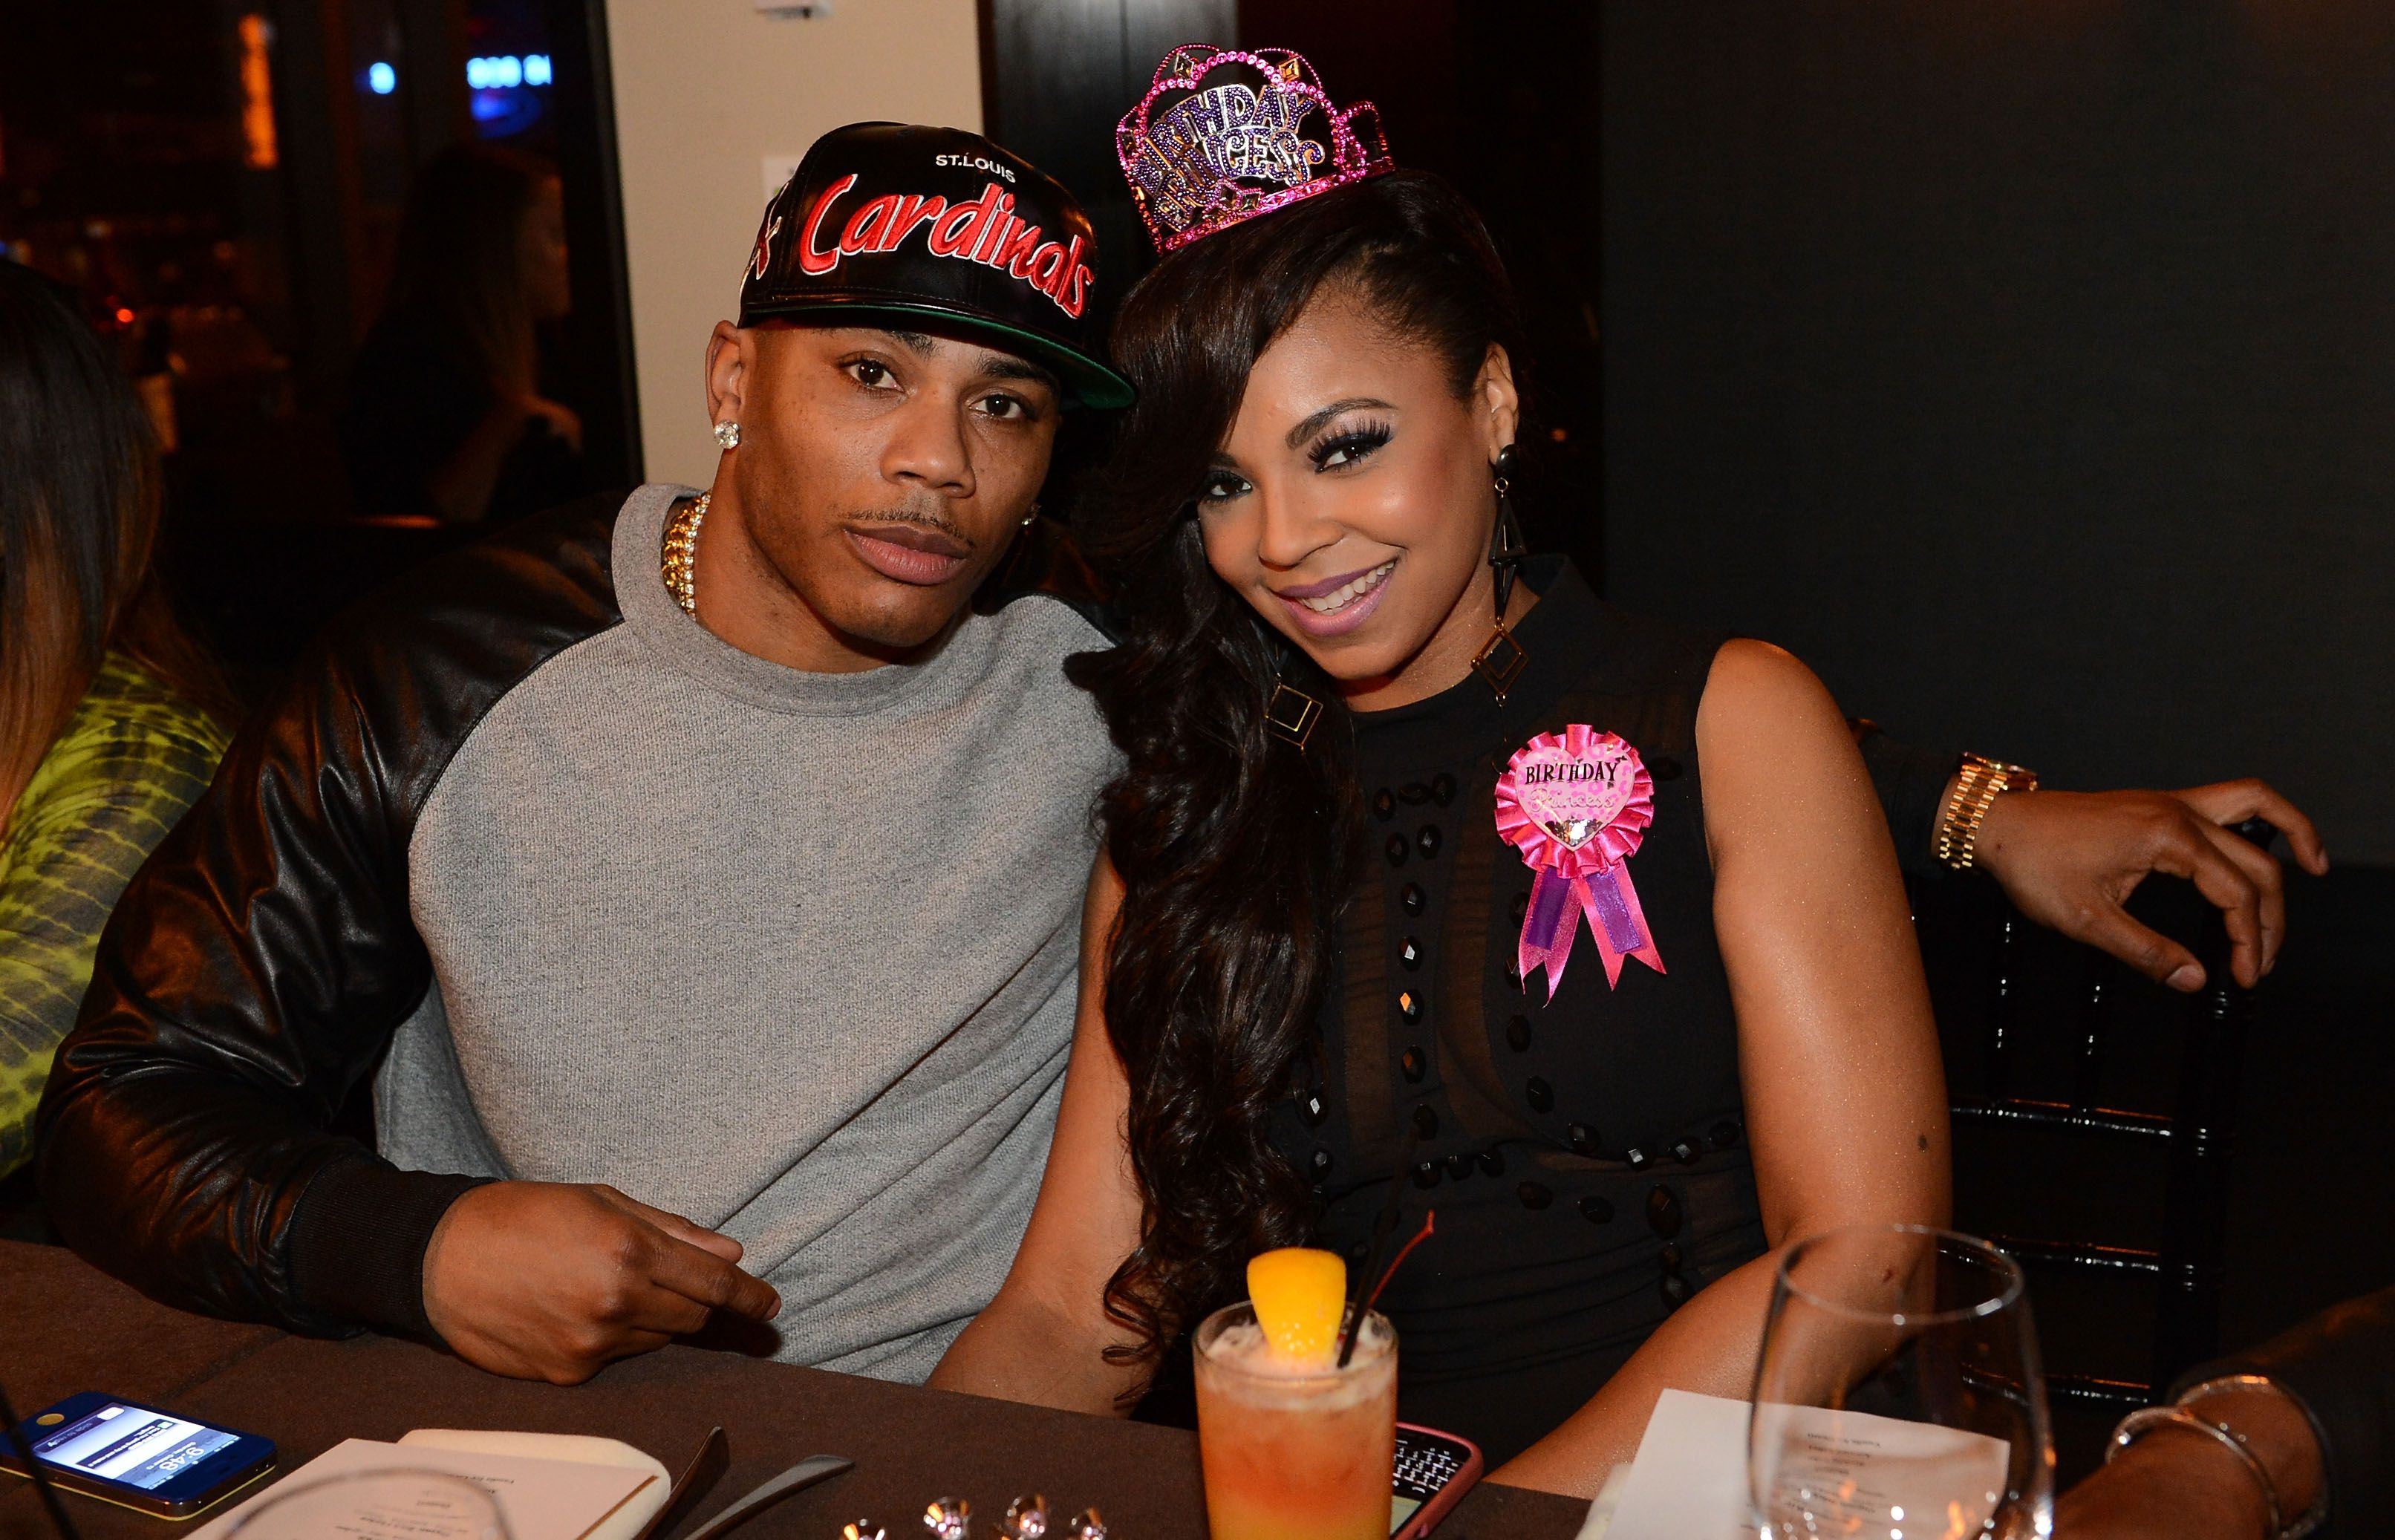 Nelly and Ashanti during Ashanti's surprise birthday dinner in October 2012 in Atlanta, Georgia | Source: Getty Images